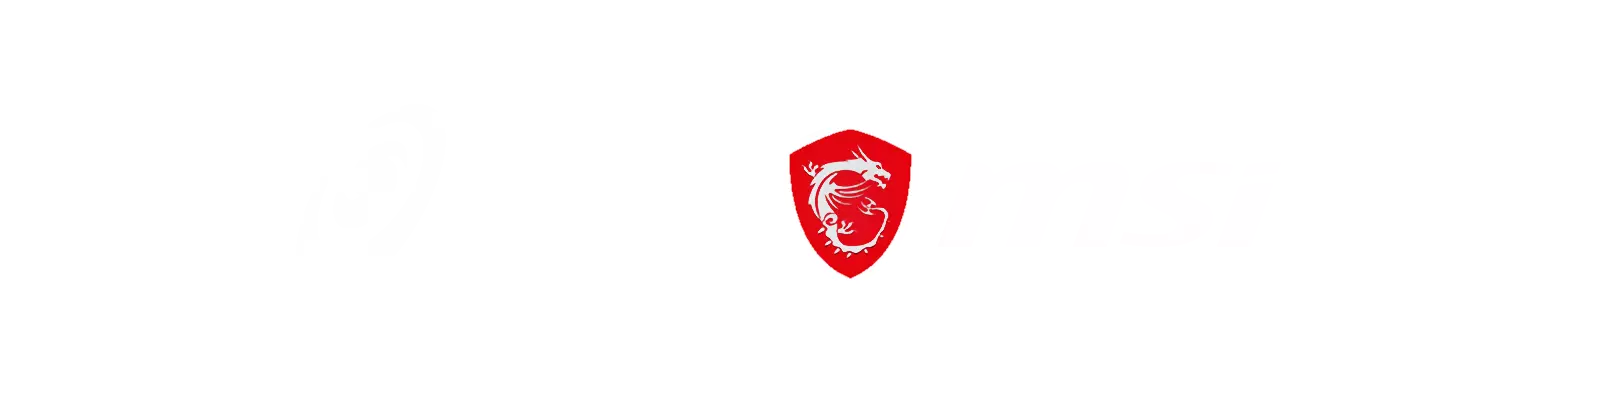 Space Productions x MSI Gaming banner